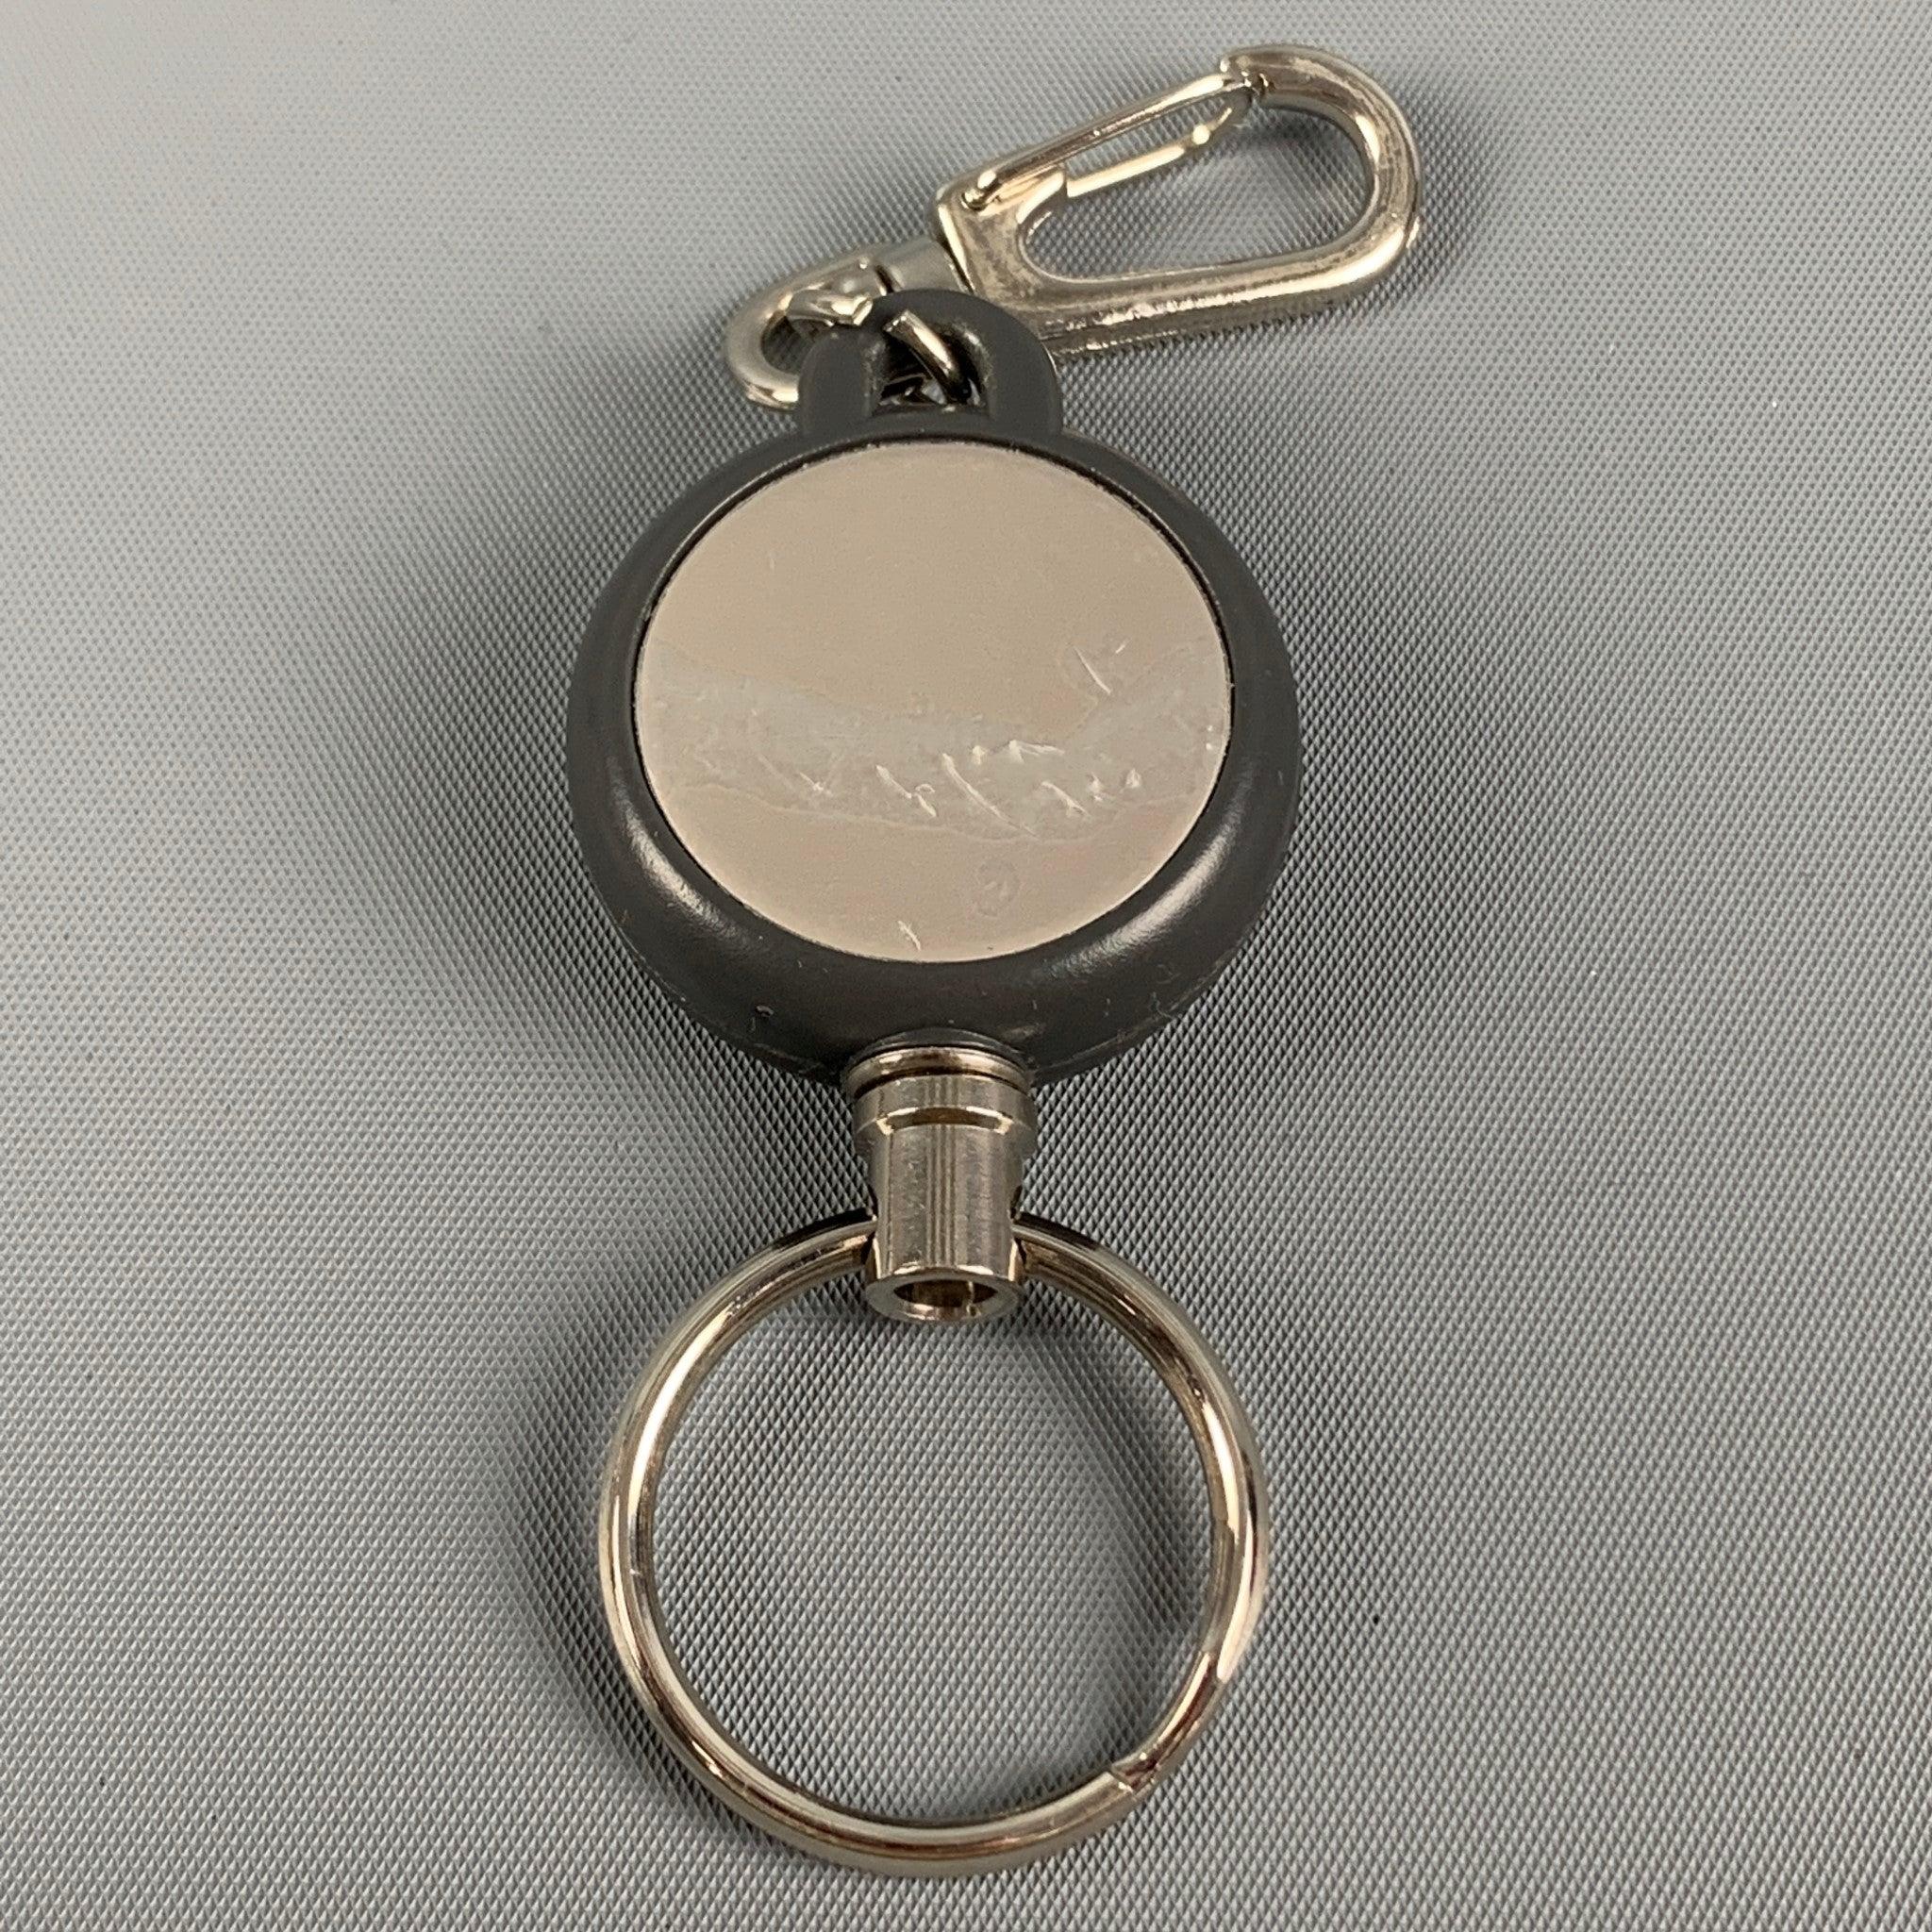 TUMI Silver Tone Metal Key Ring In Good Condition For Sale In San Francisco, CA